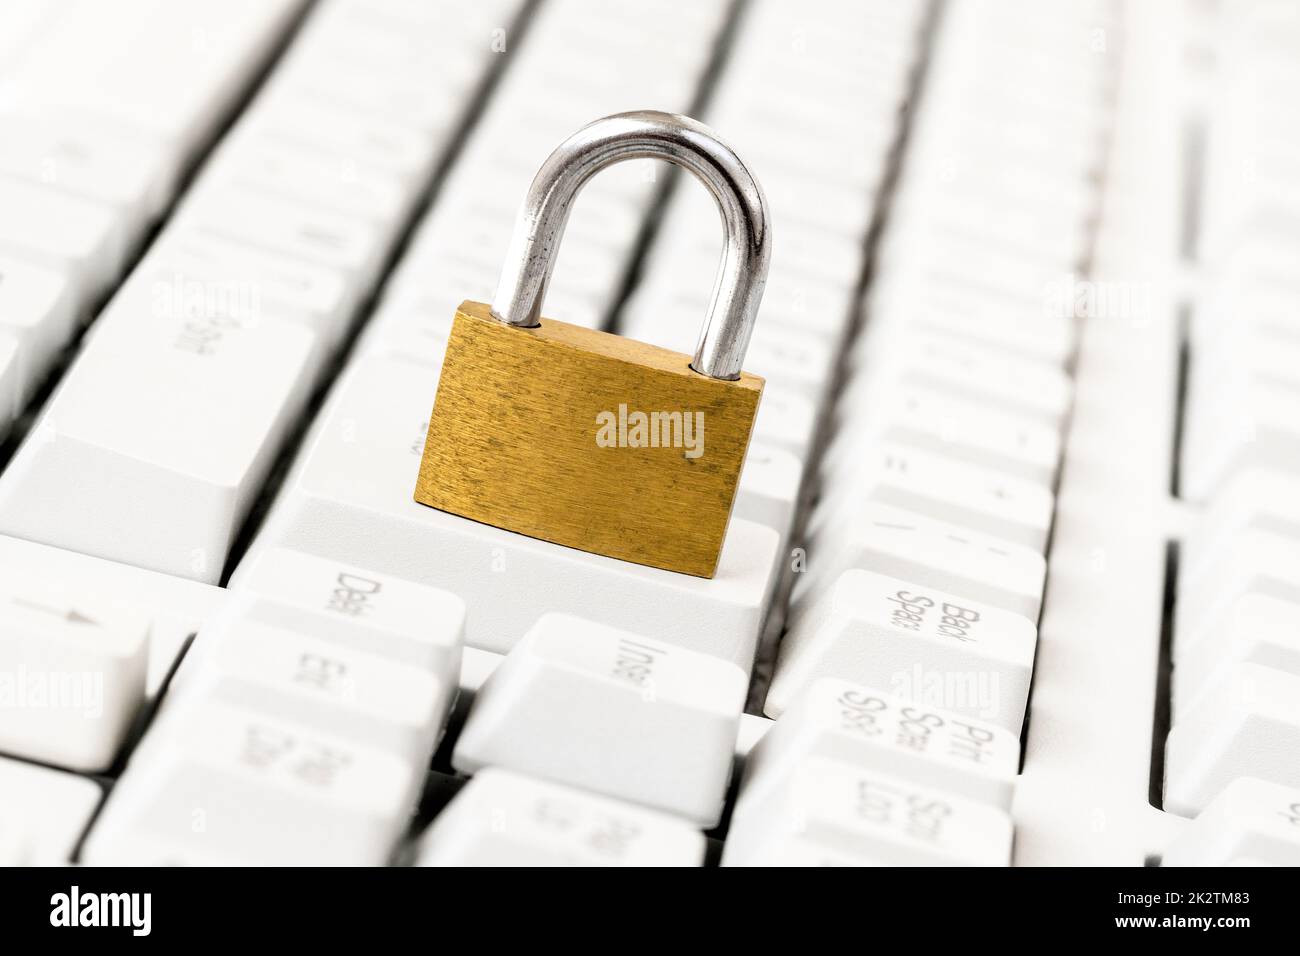 Security concept with metal padlock on computer keyboard Stock Photo